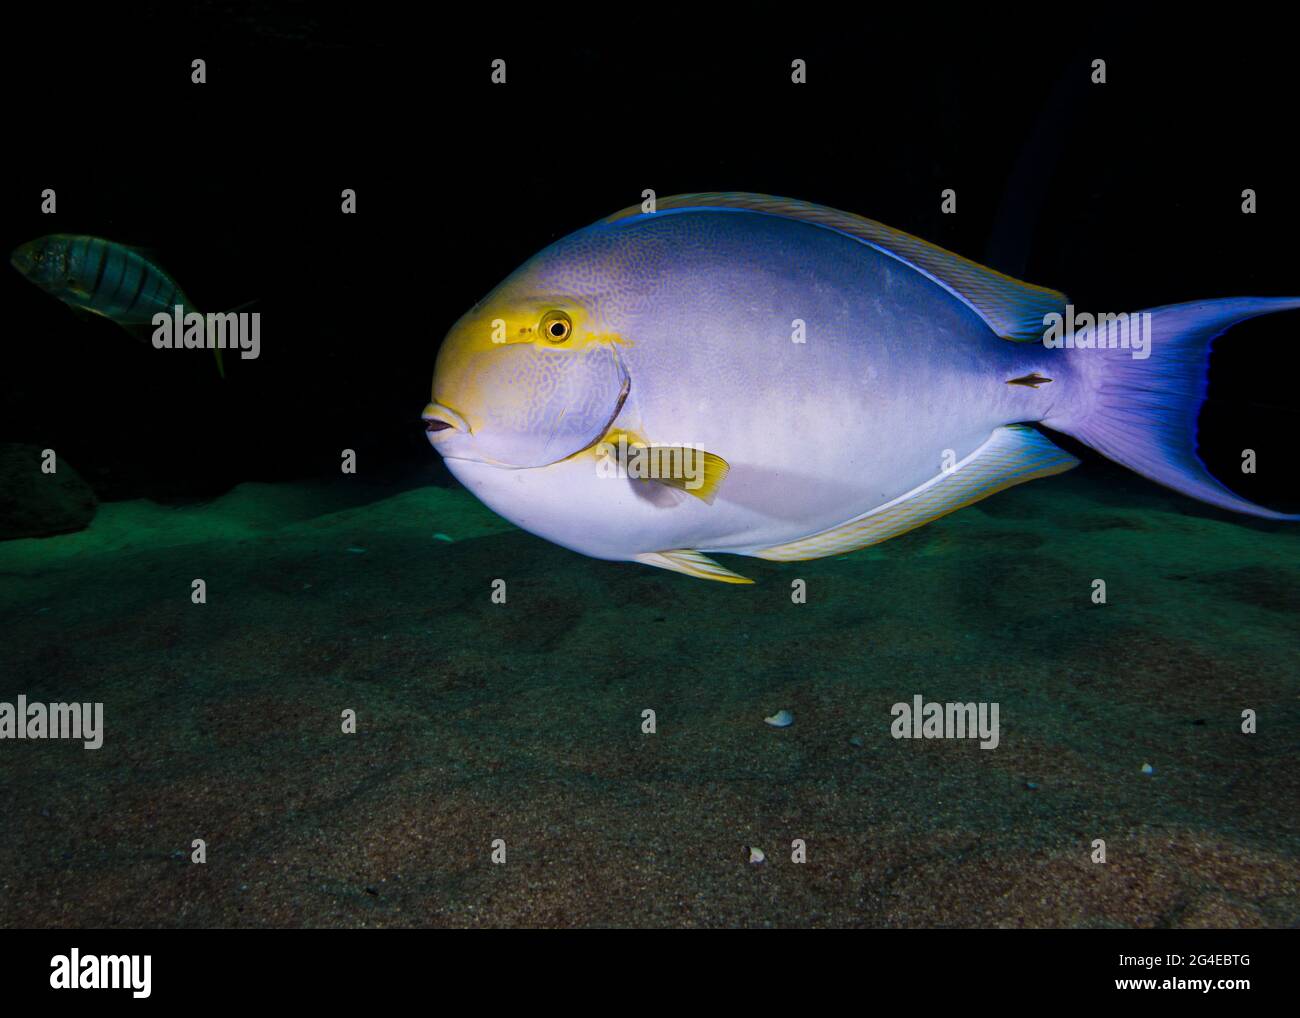 Closeup of a Surgeonfish side view, light blue body with yellow fins and face Stock Photo